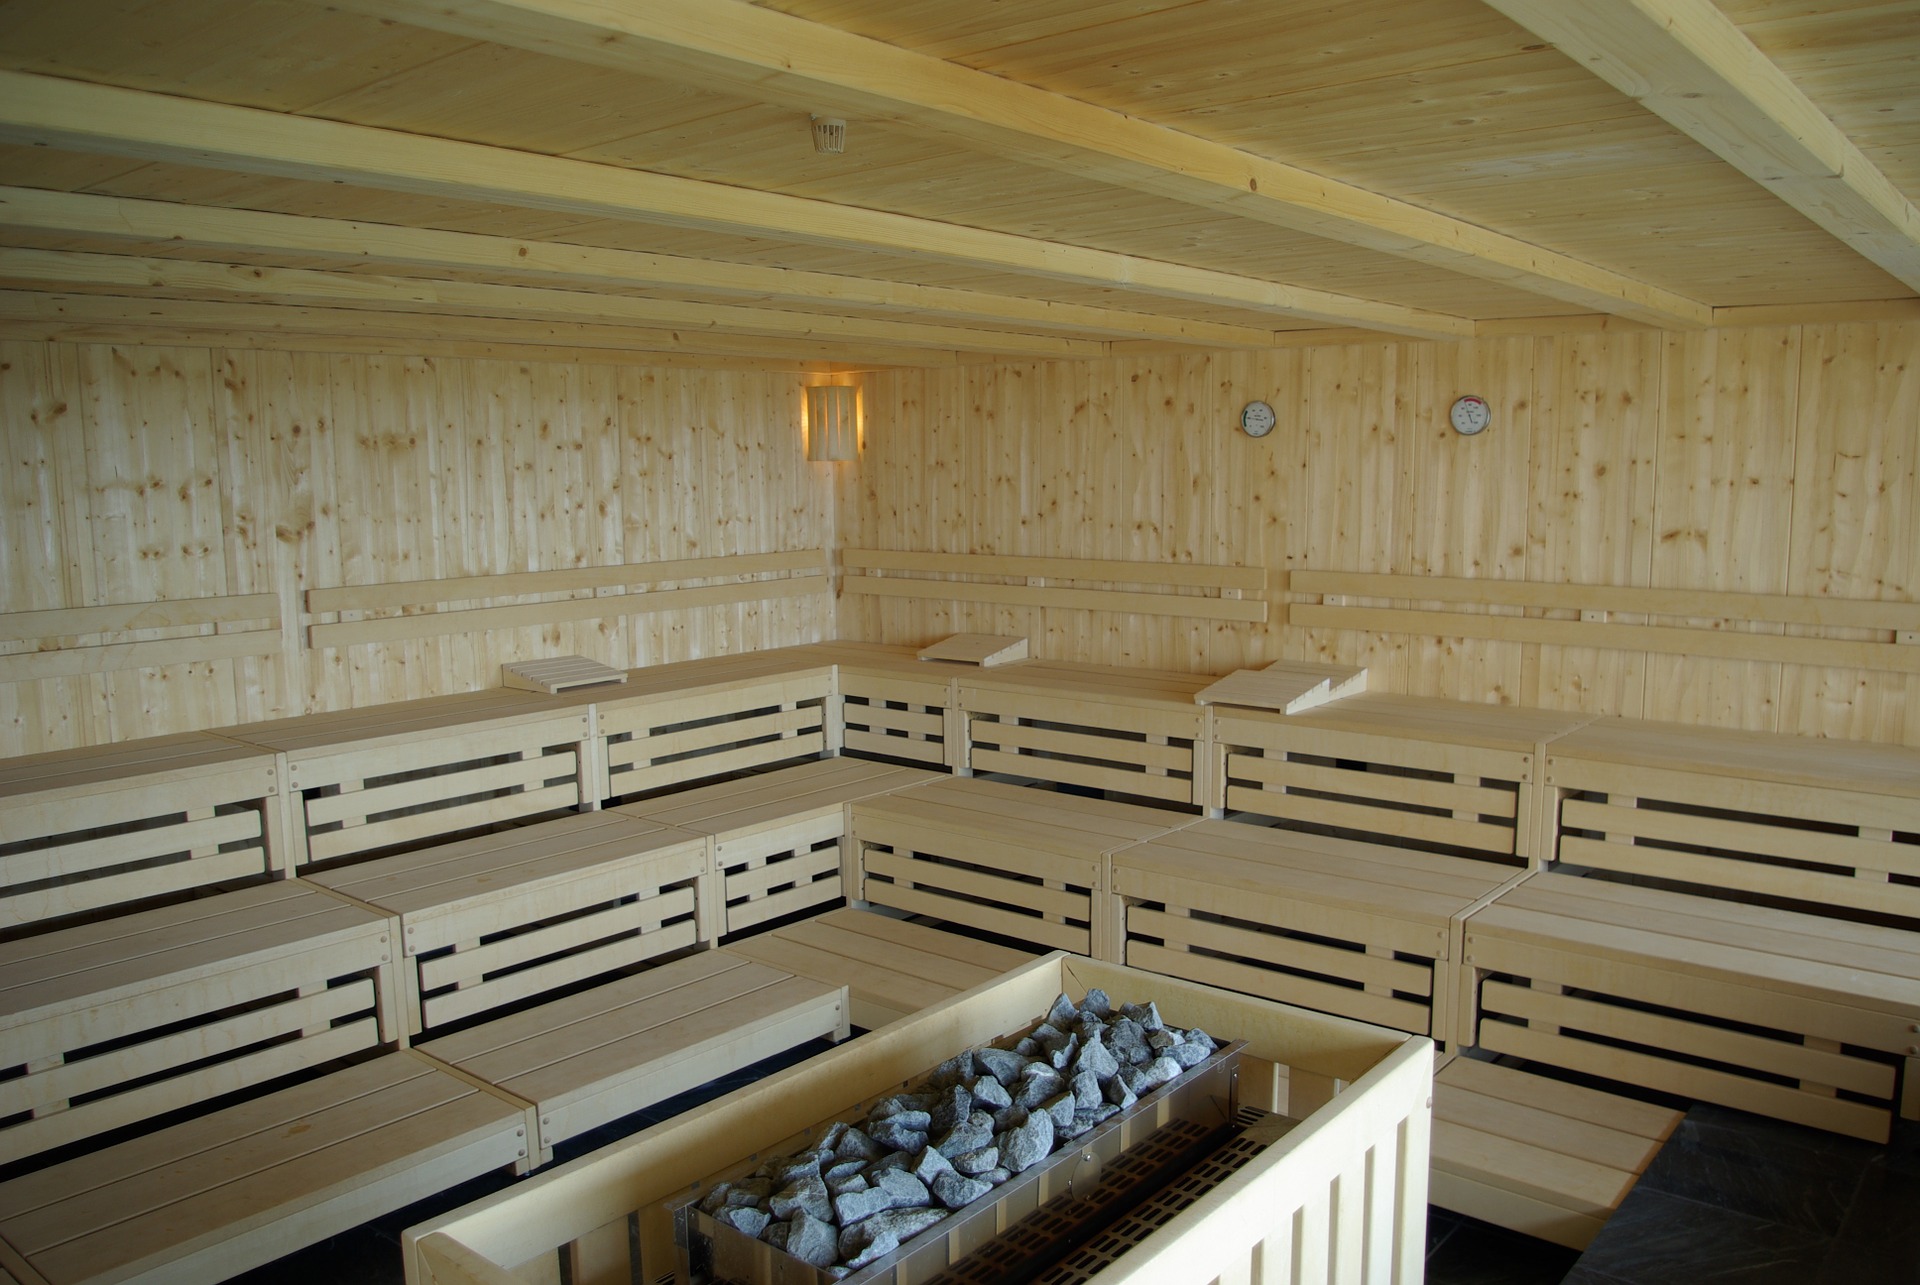 Finnish Public Sauna: What to Expect During This Cultural Experience